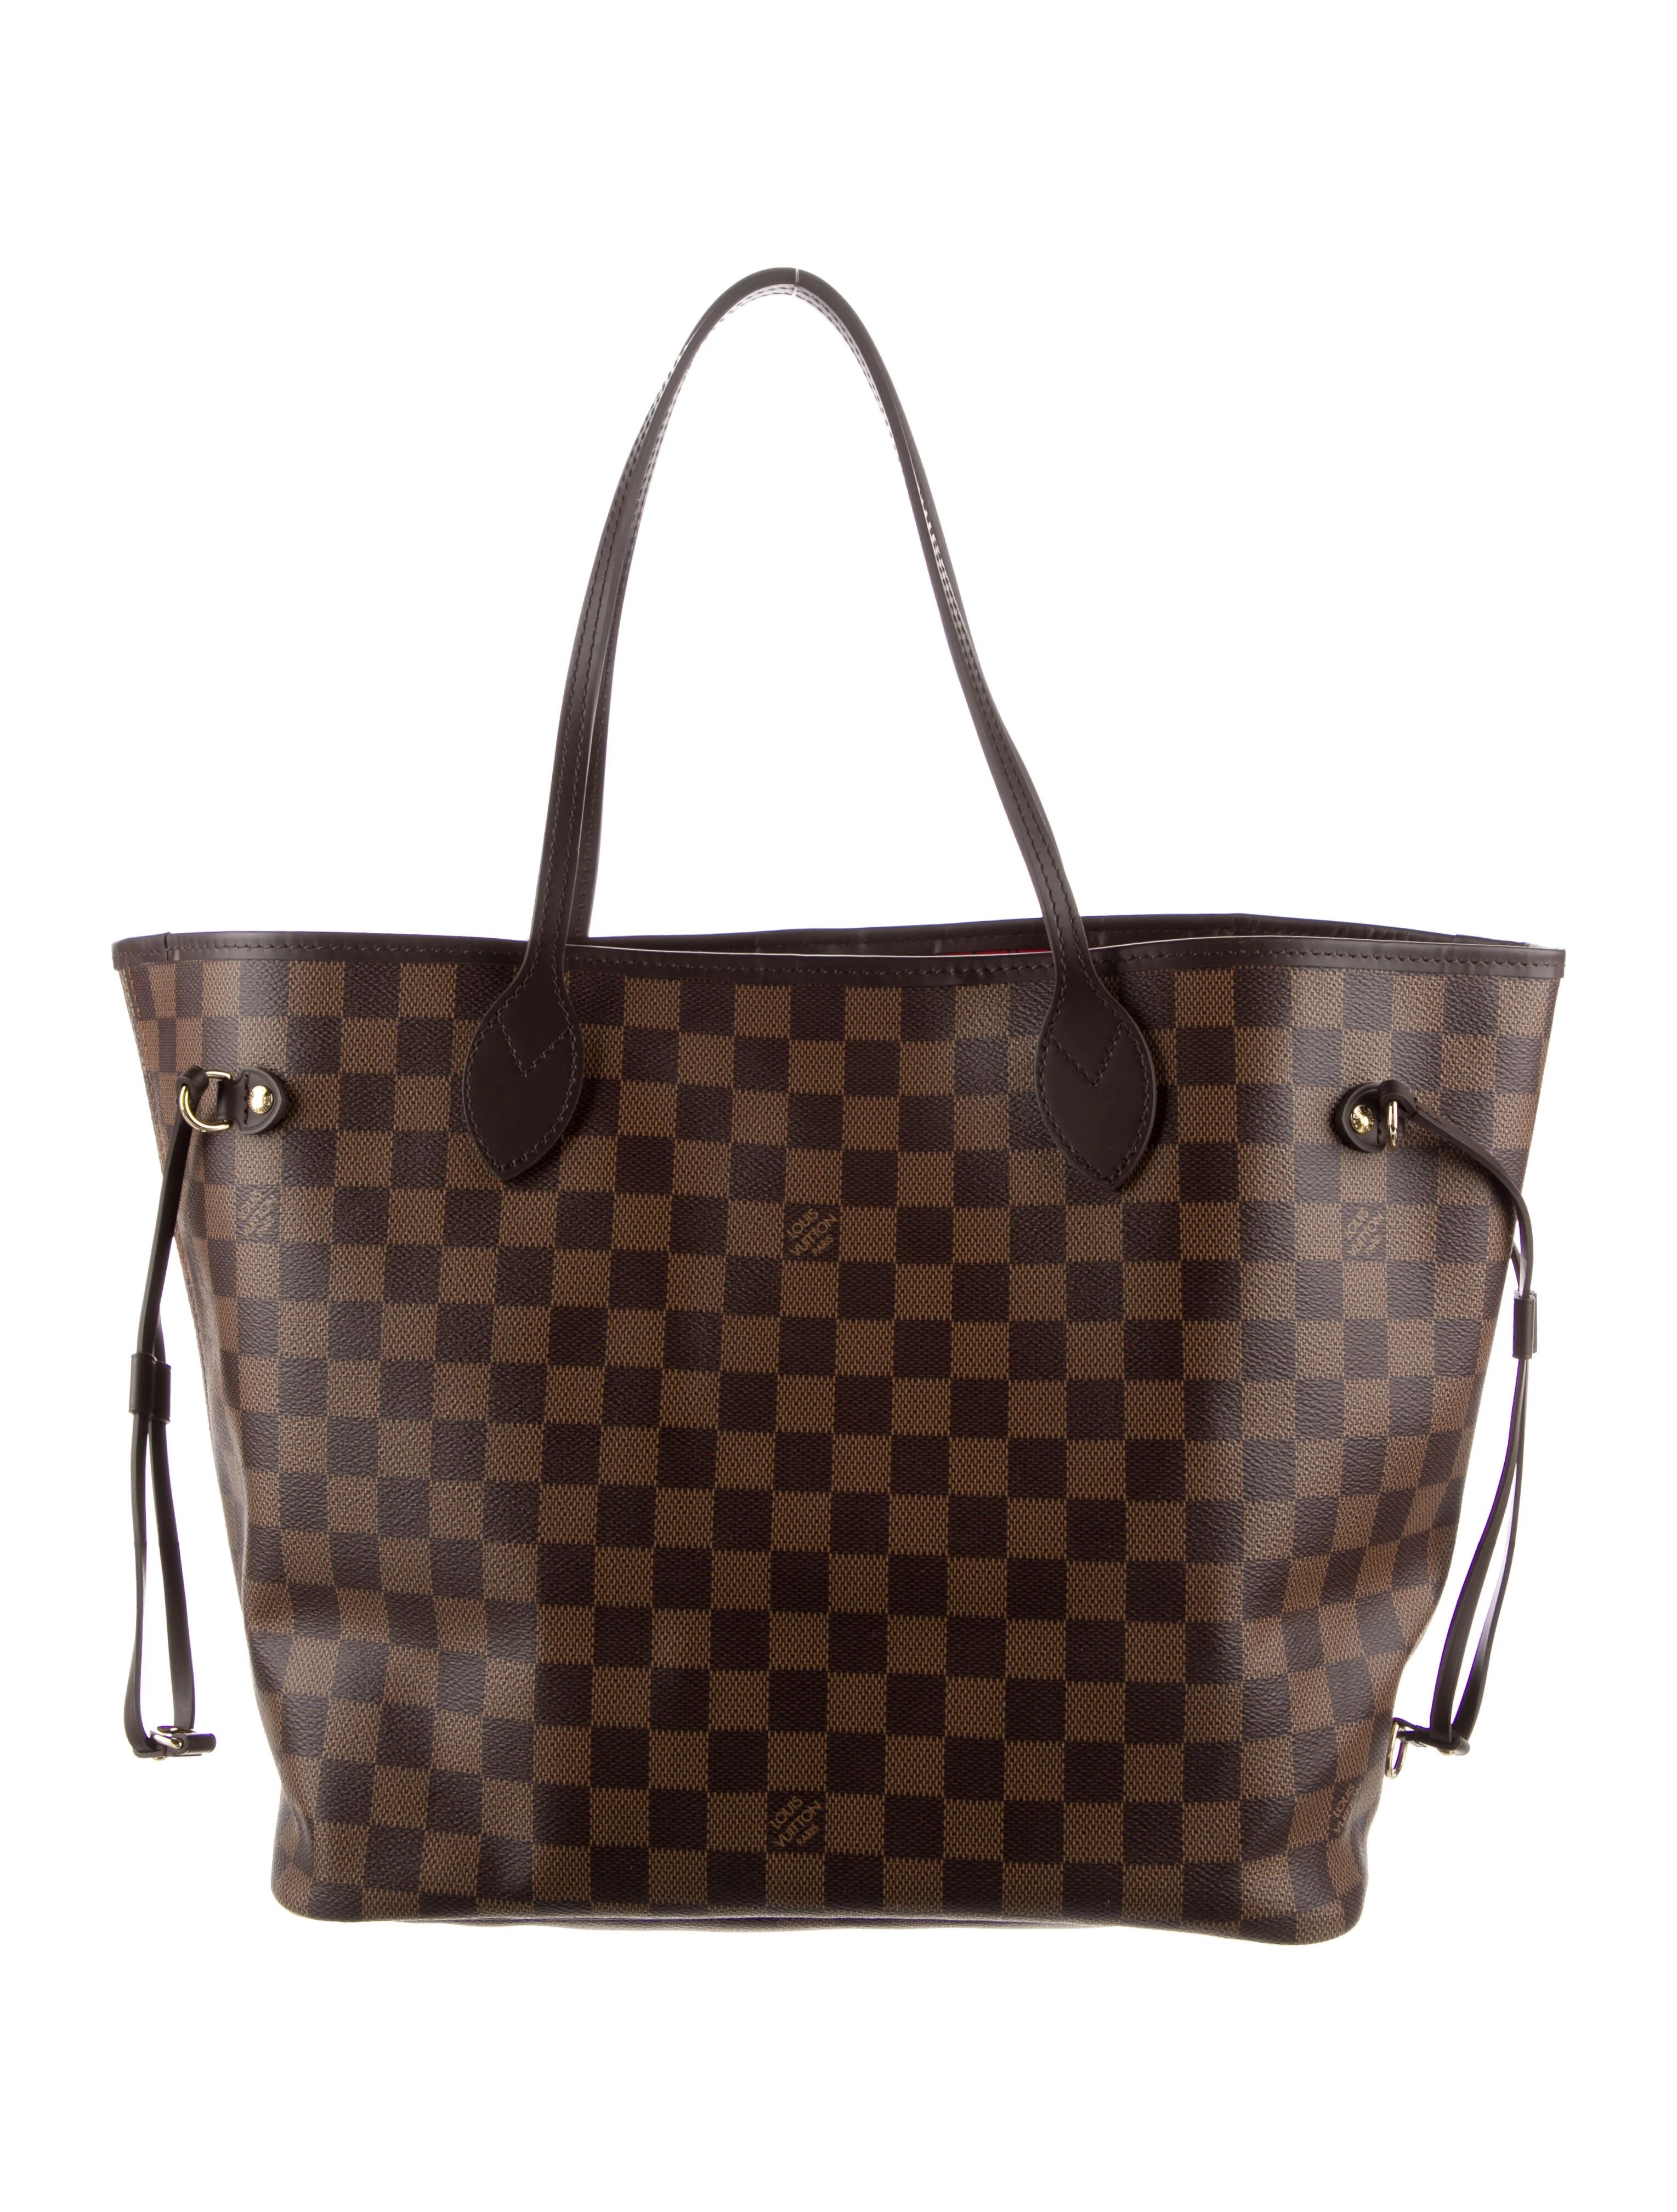 Damier Ebene Neverfull MM w/Pouch | The RealReal